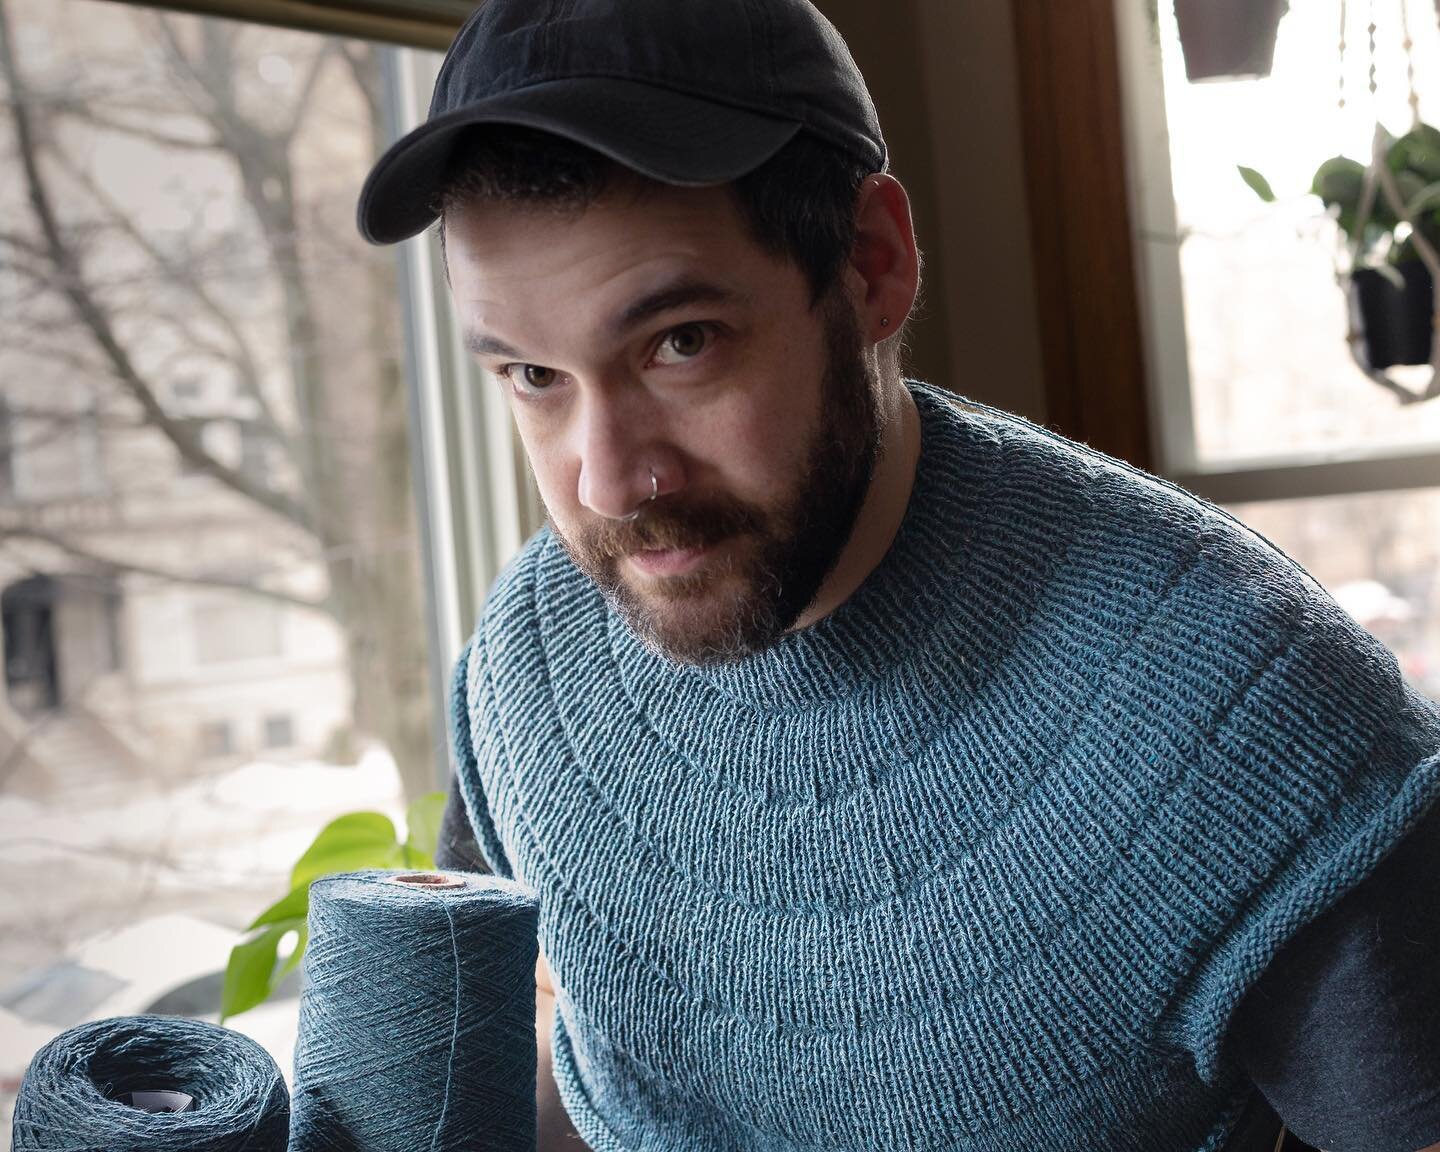 I&rsquo;m spending a mostly lazy day working on this Ankers Sweater by @petiteknit. Trying to get a picture of it was a challenge, so I spent most of the little photoshoot looking i#at my camera&rsquo;s screen trying to see if the yoke looked okay 🤣